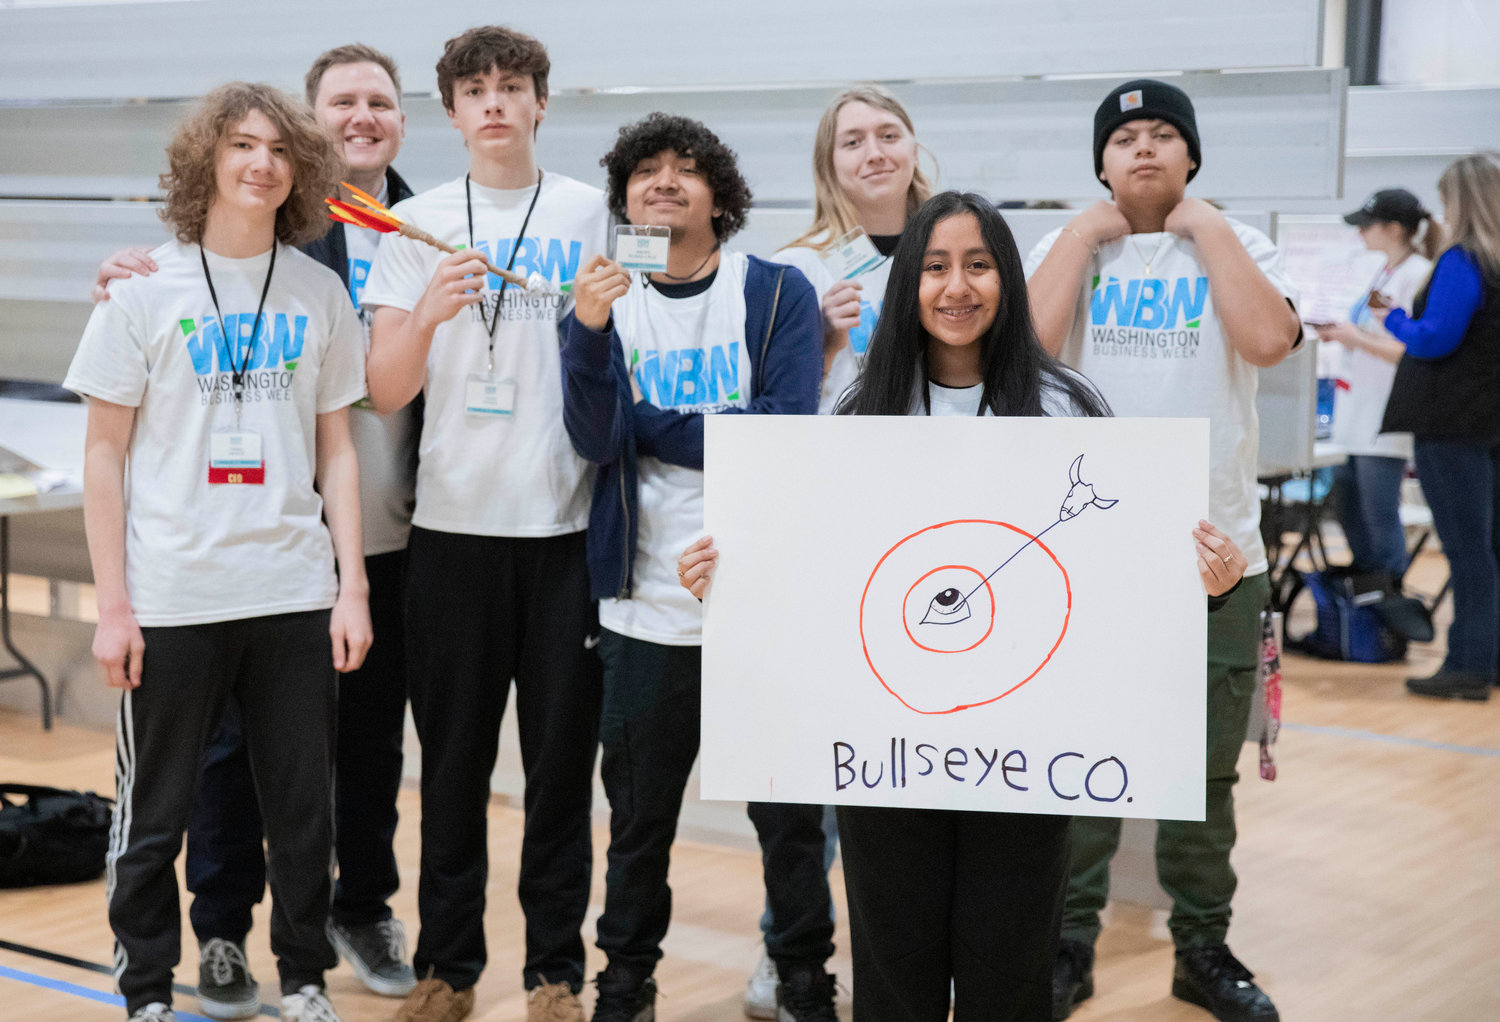 Centralia High School students pose for a photo holding a sign for their company Bullseye Co. during Washington Business Week Wednesday morning at the Northwest Sports Hub.